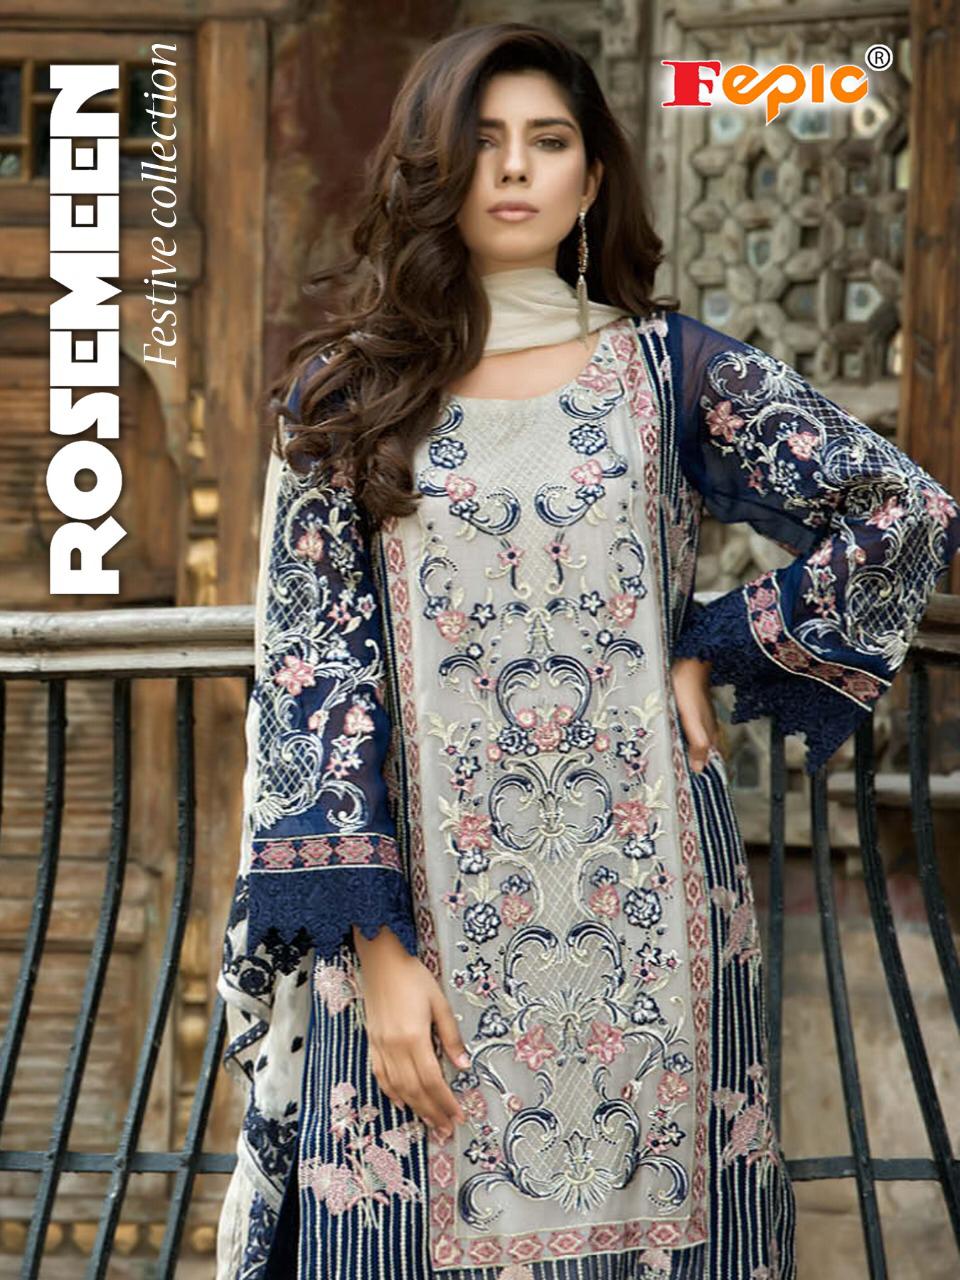 Fepic rosemeen festive collection heavy embroidered karachi suits catalog